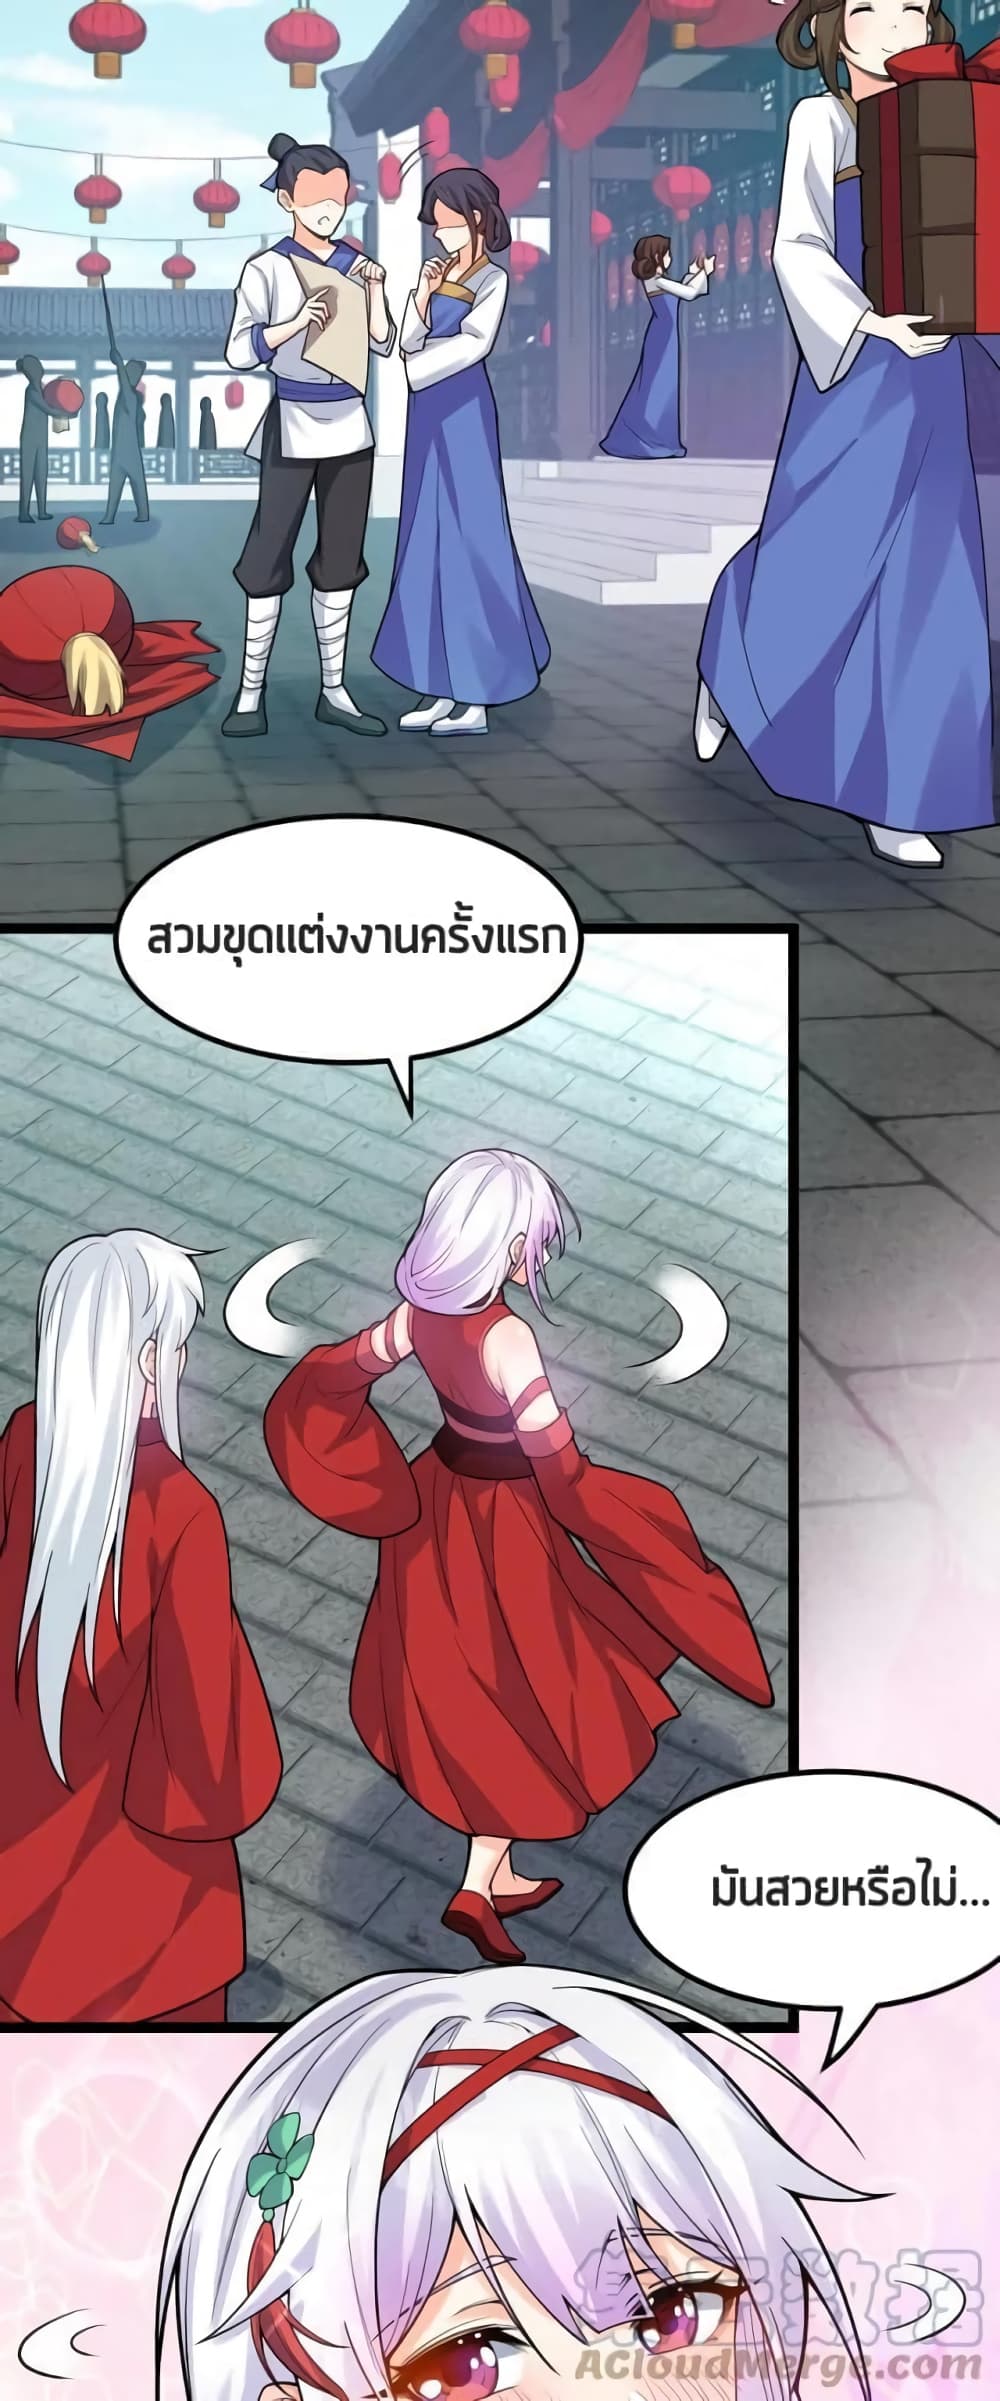 Godsian Masian from Another World ตอนที่ 108 (16)